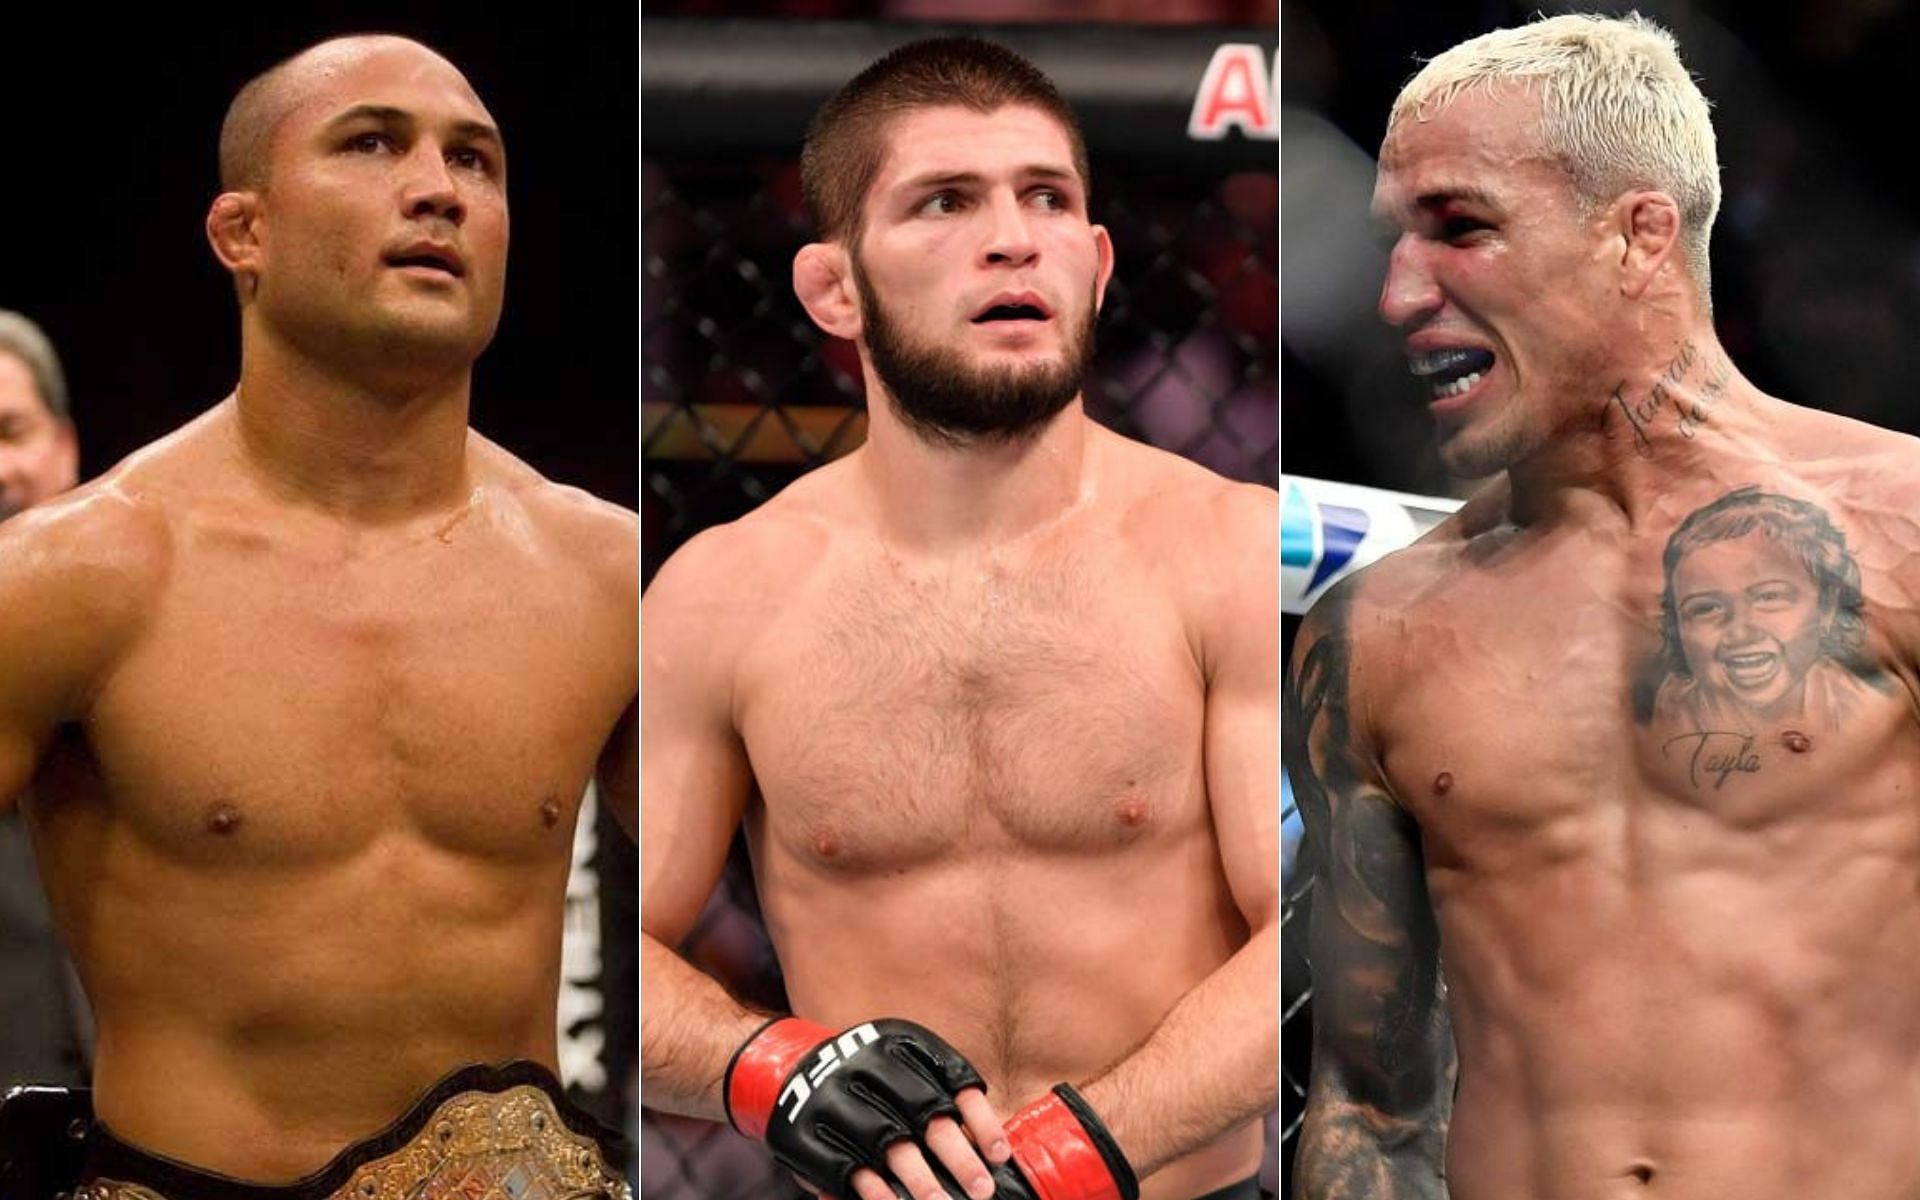 Could BJ Penn (left) and Khabib Nurmagomedov (centre) have beaten the current version of Charles Oliveira?